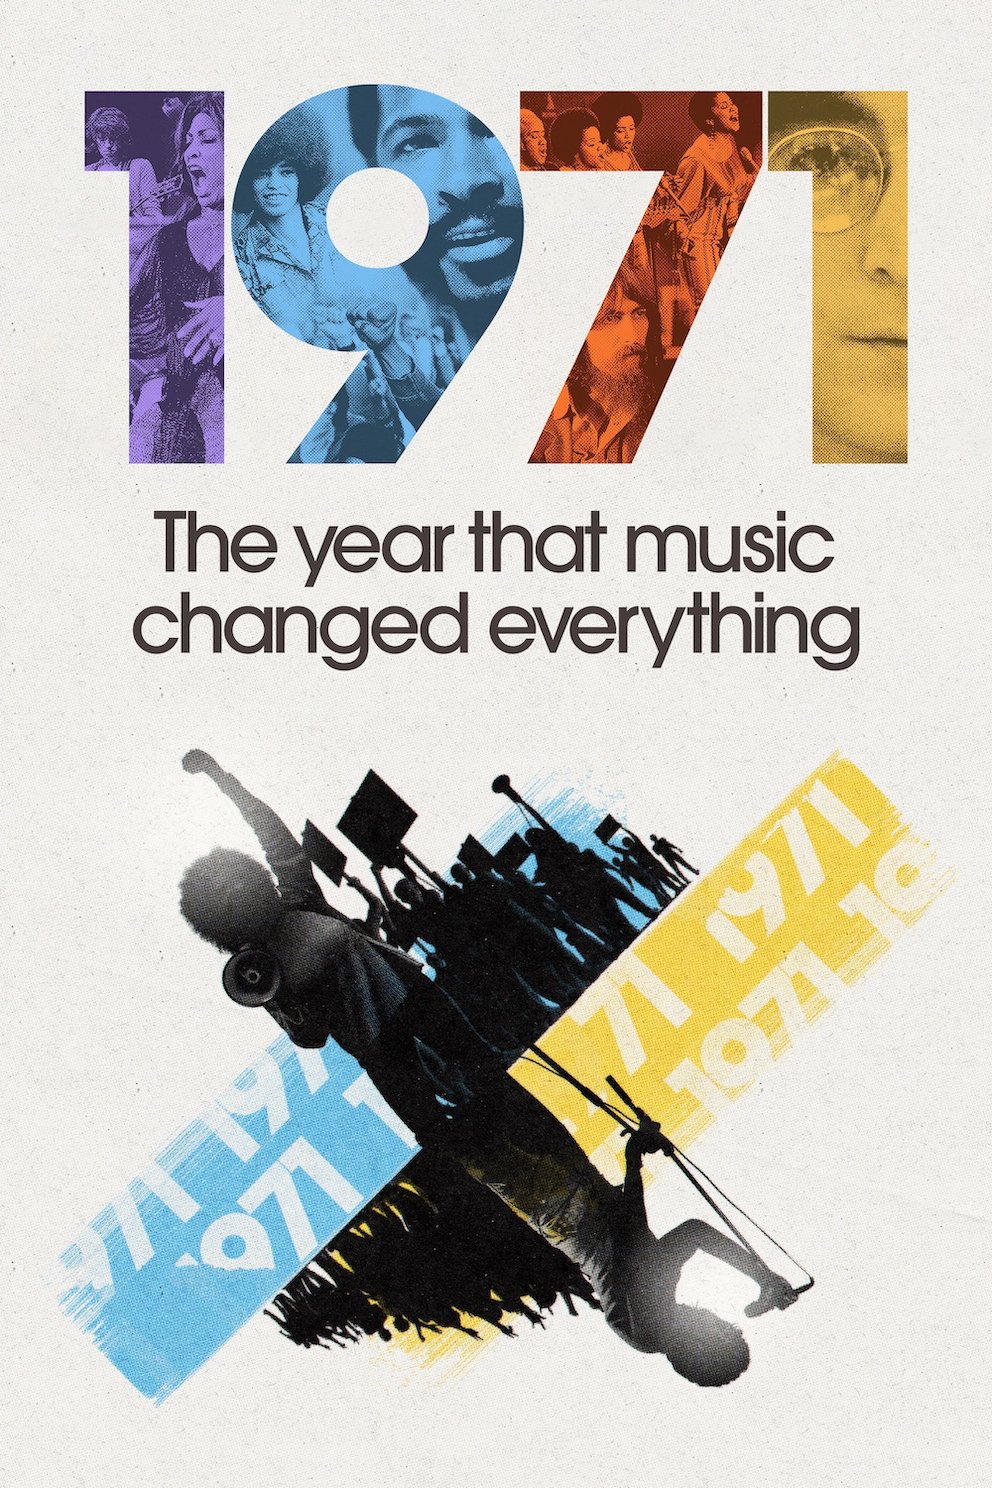 1971 - The year that music changed everything